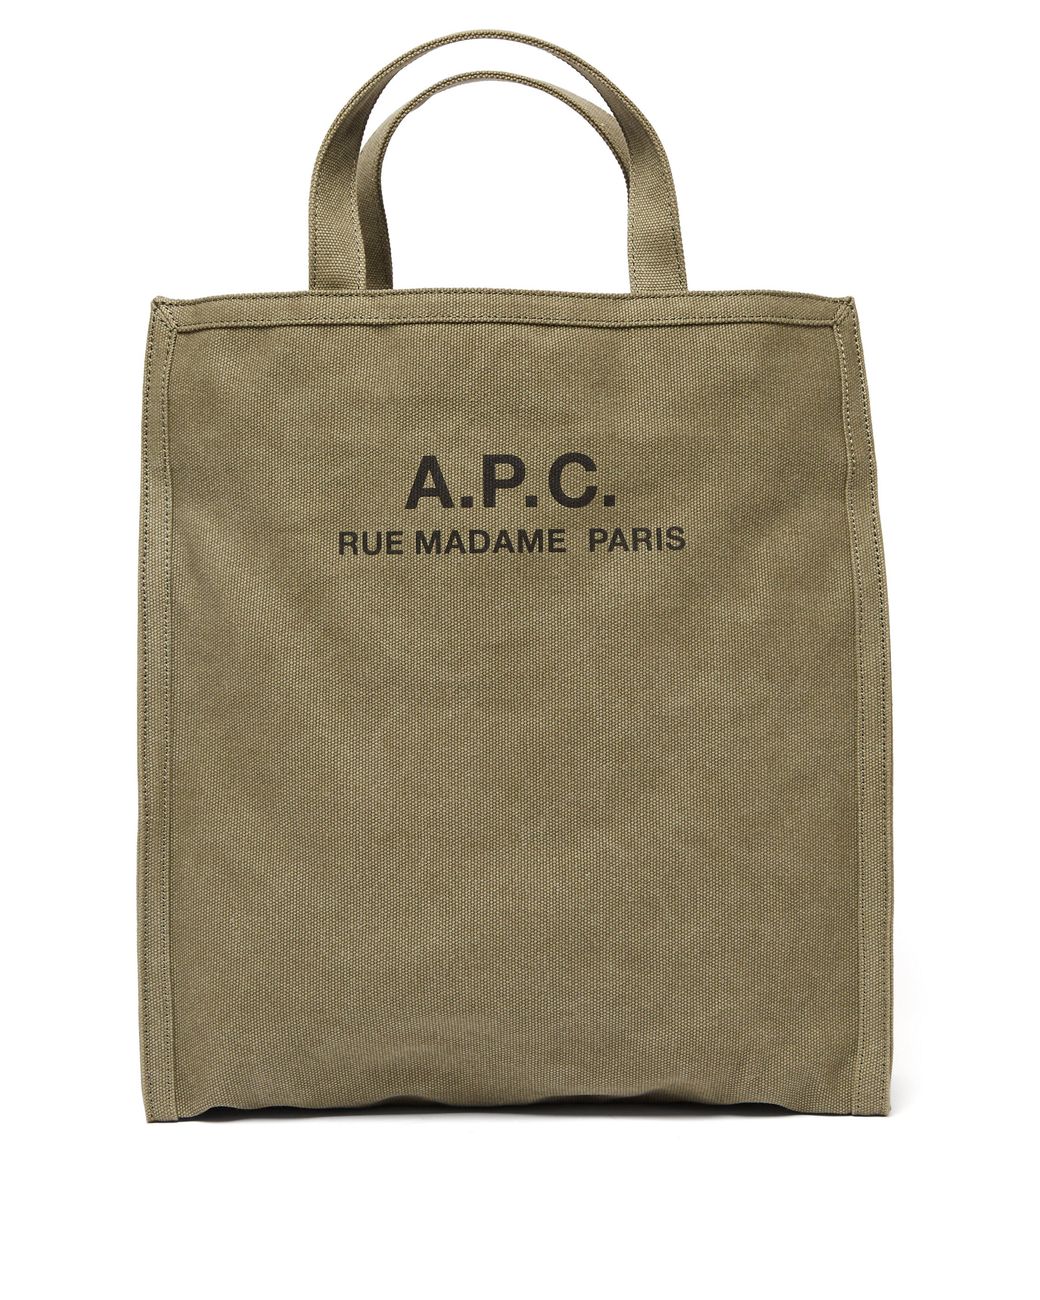 A.P.C. Recuperation Heavy Canvas Tote Bag in Green for Men | Lyst Australia